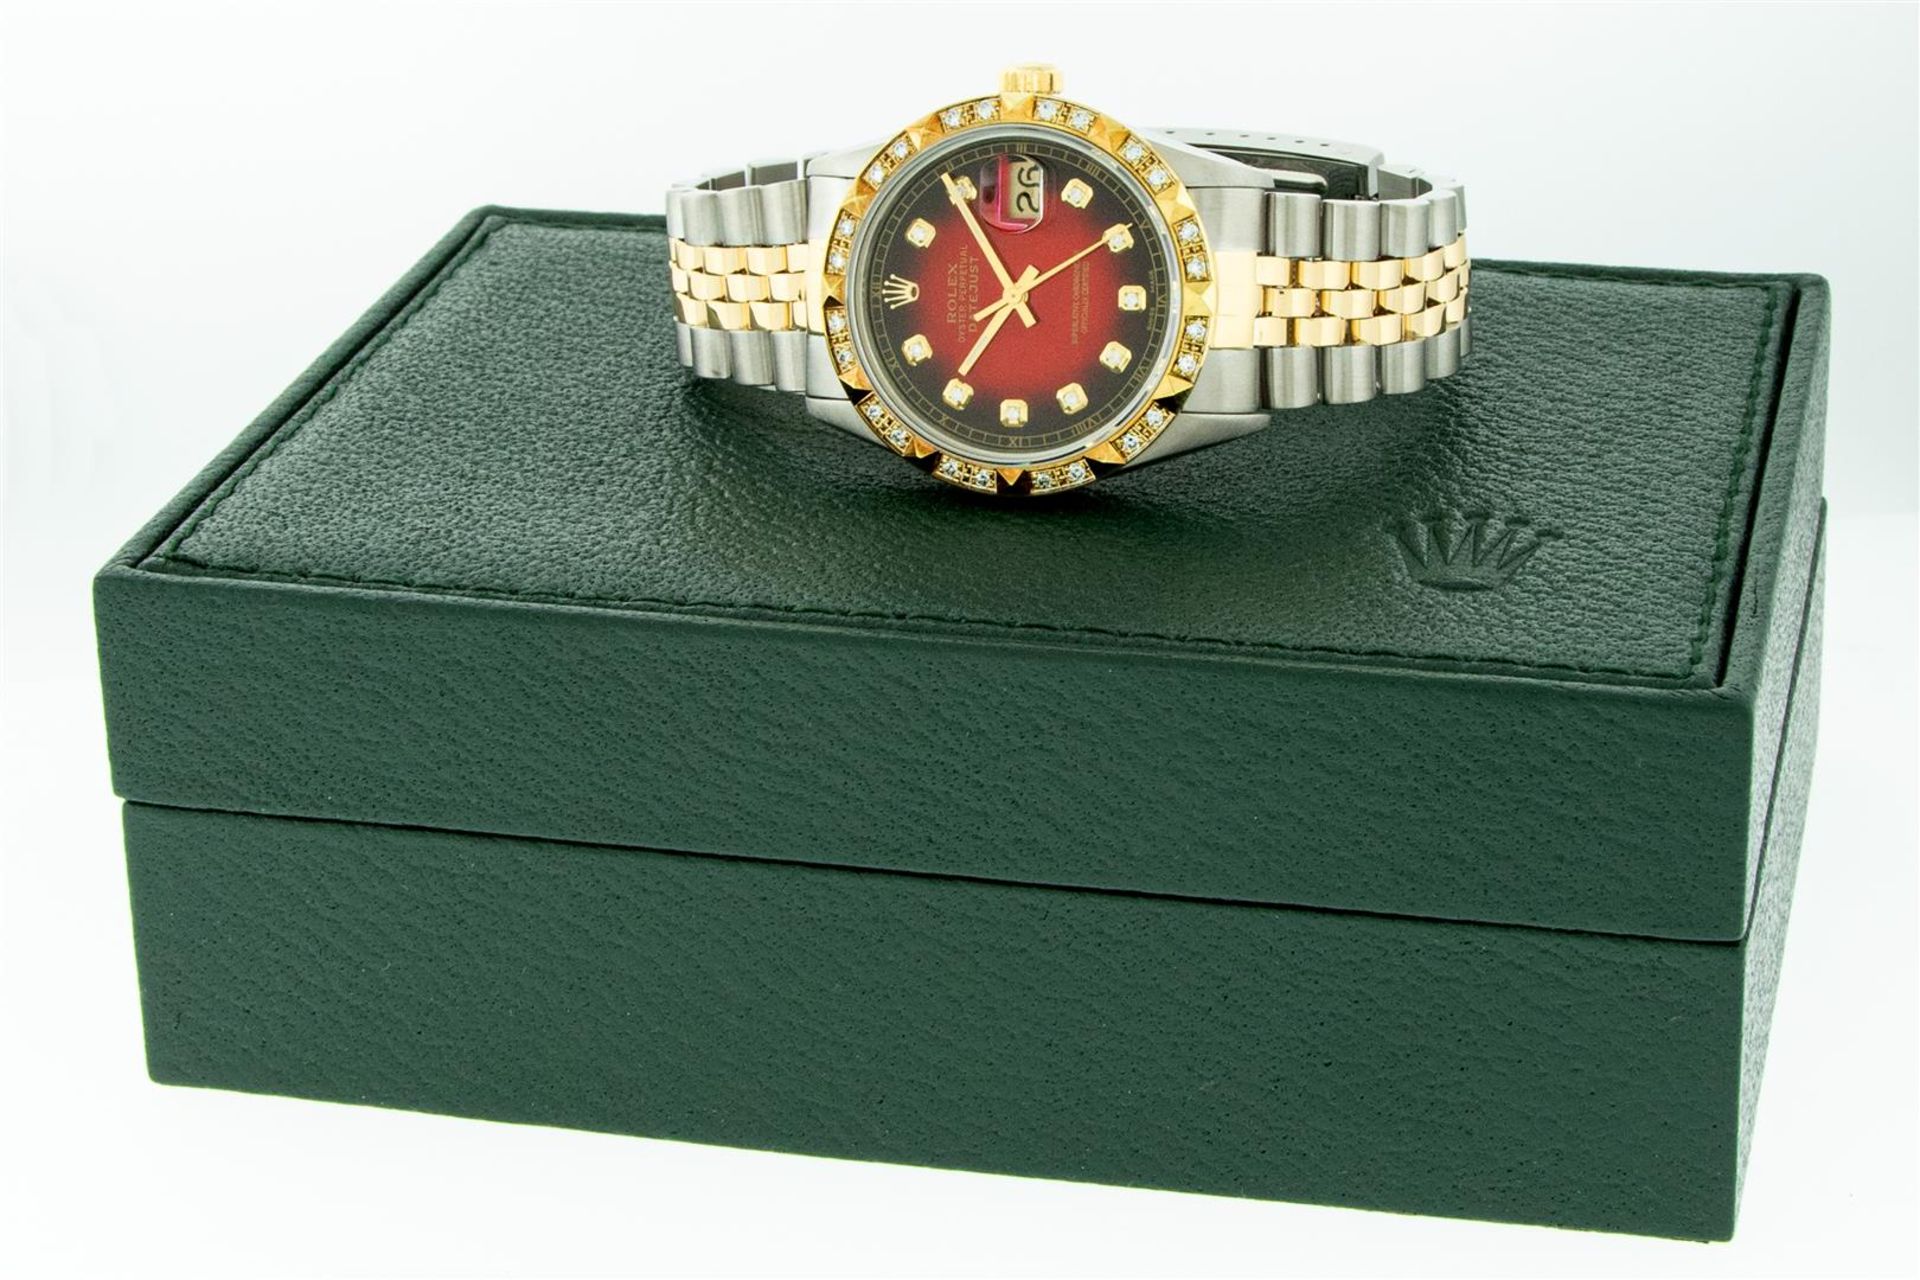 Rolex Mens 2 Tone Red Vignette Pyramid Diamond 36MM Oyster Perpetual Datejust Wi - Image 5 of 9